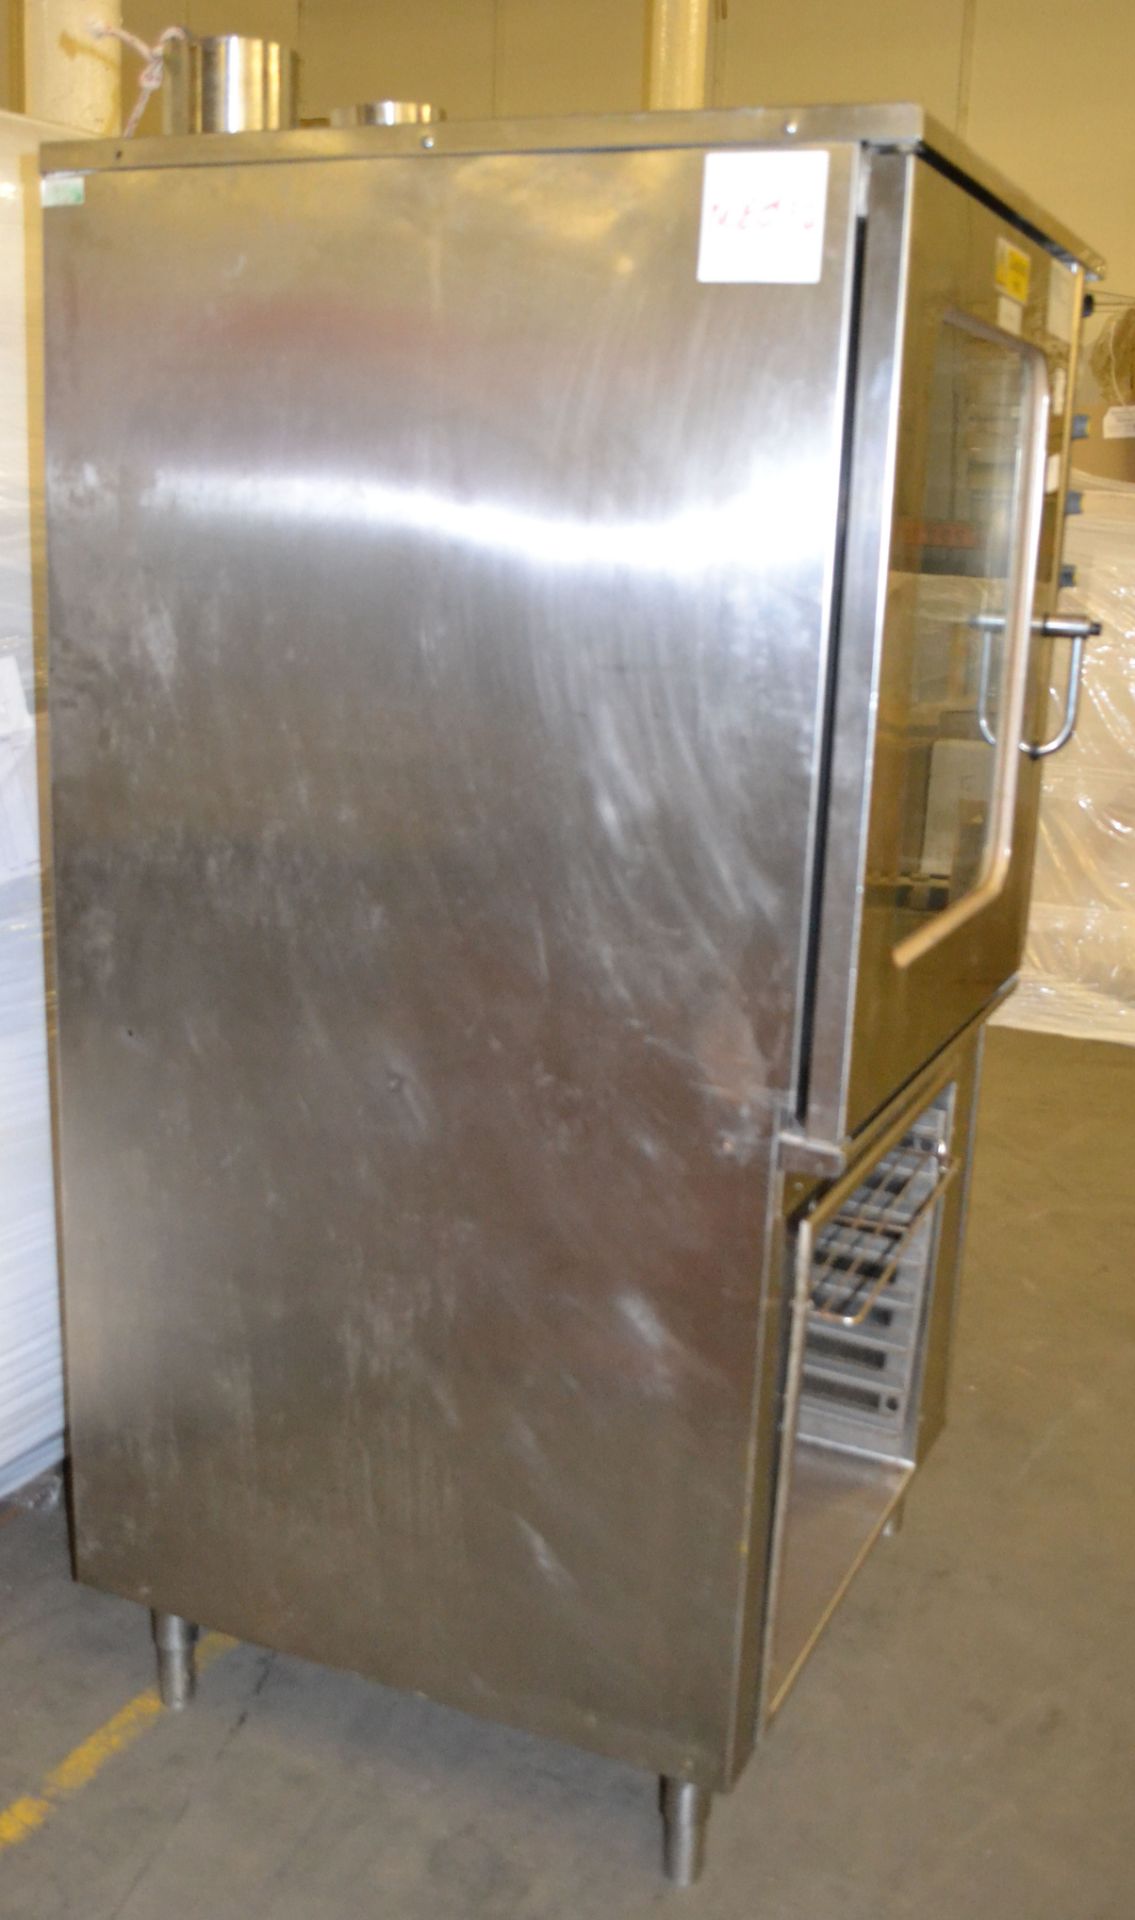 1 x Lainox MG110M LX Type Combination Oven with Pan Capacity - Ref:NCE032 - CL007 - Location: Bolton - Image 12 of 15